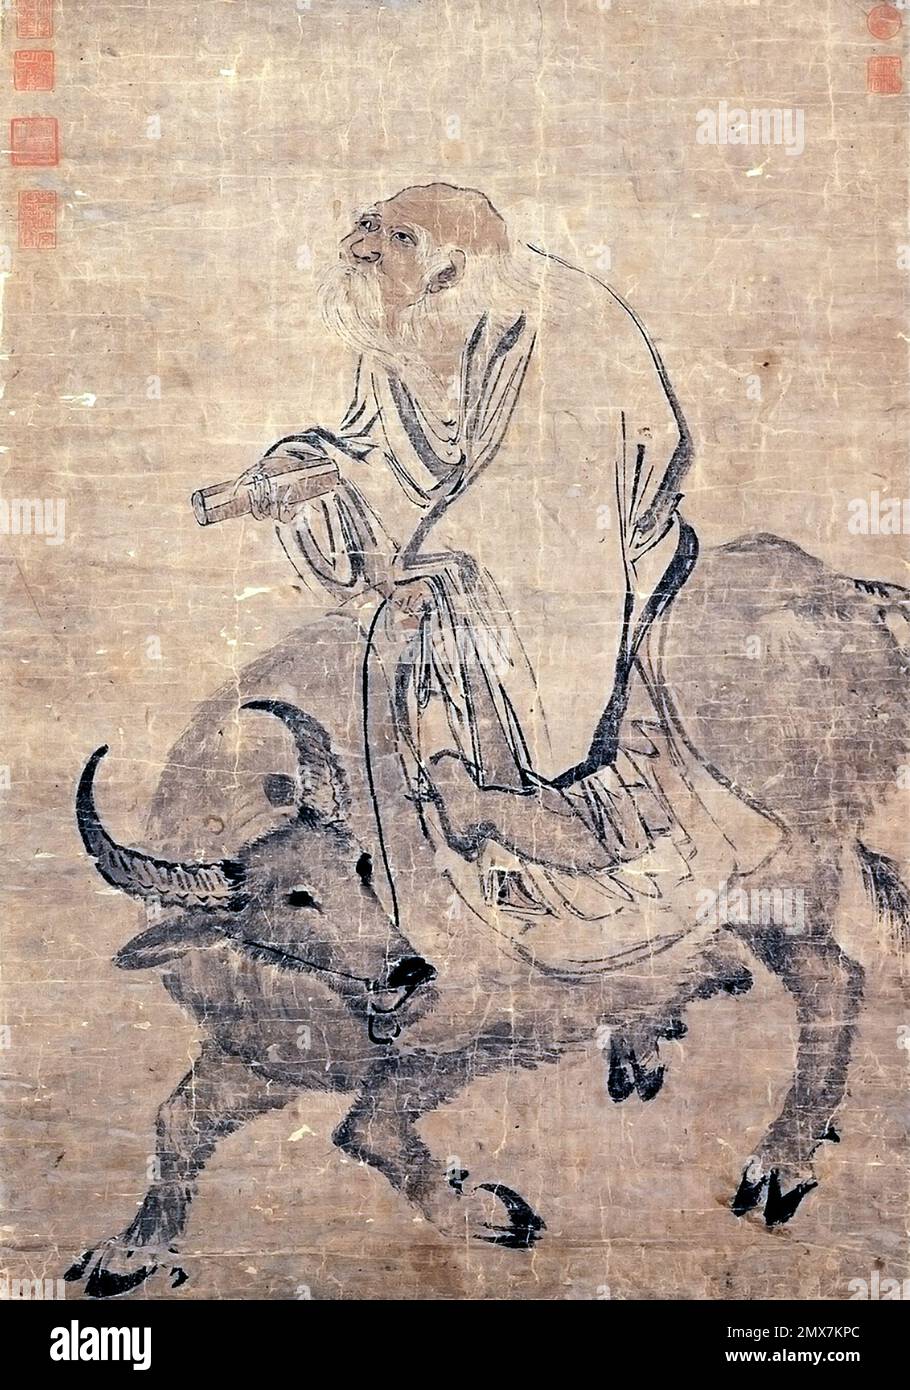 Lao Tzu. Illustration of the ancient Chinese Taoist philosopher, Lao Tzu ( Laozi ) Riding an Ox by Zhang Lu  (1464–1538), scroll, c. 1480-1538 Stock Photo